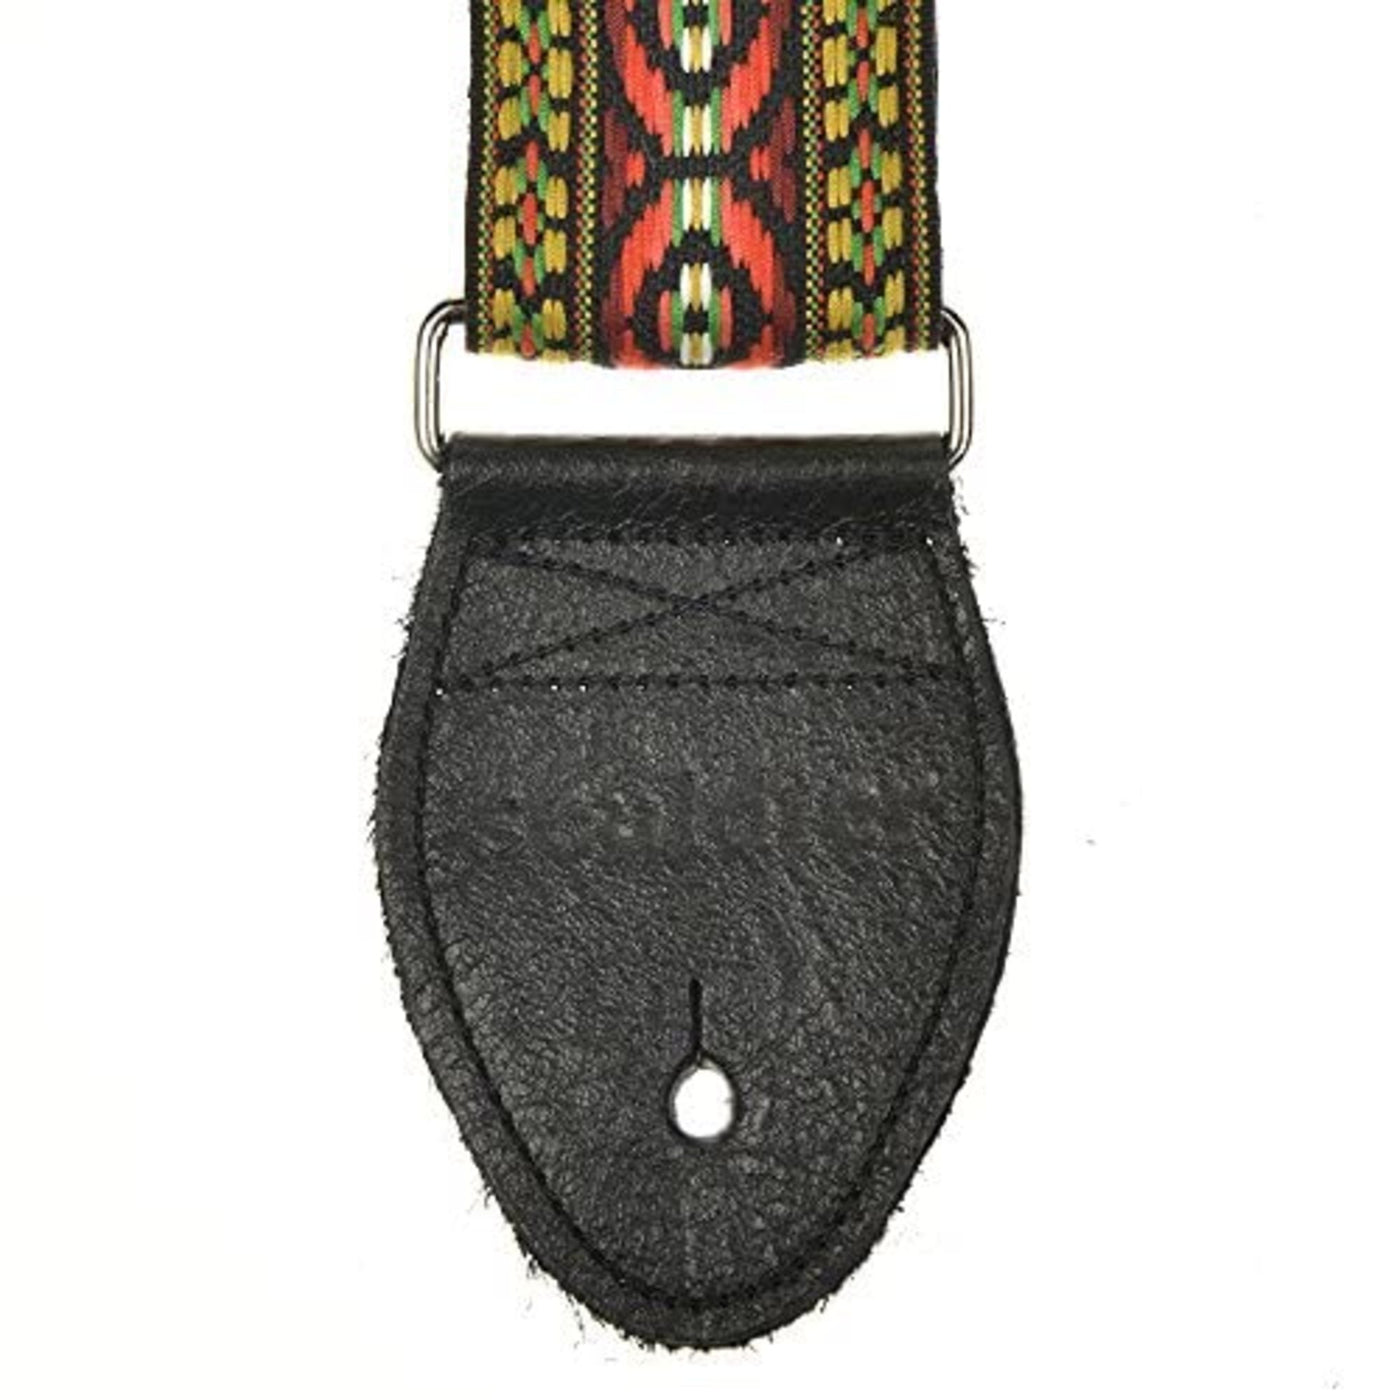 Souldier GS0279BK02BK - Handmade Seatbelt Guitar Strap for Bass, Electric or Acoustic Guitar, 2 Inches Wide and Adjustable Length from 30" to 63"  Made in the USA, Bohemian, Red